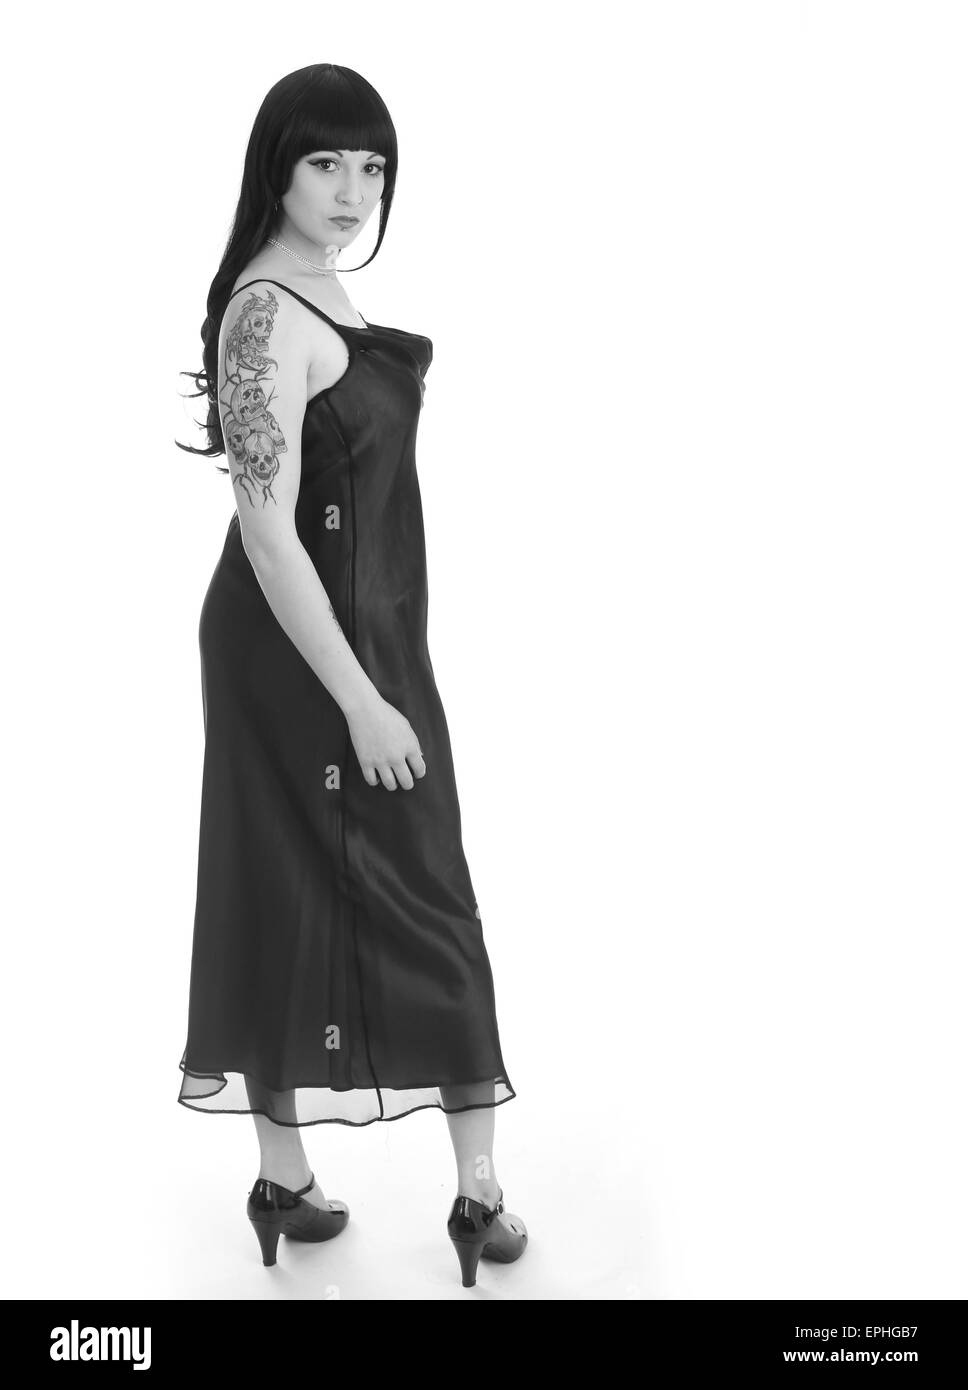 Beautiful young woman showing her skull tattoo's on her upper arm while in an evening dress Stock Photo